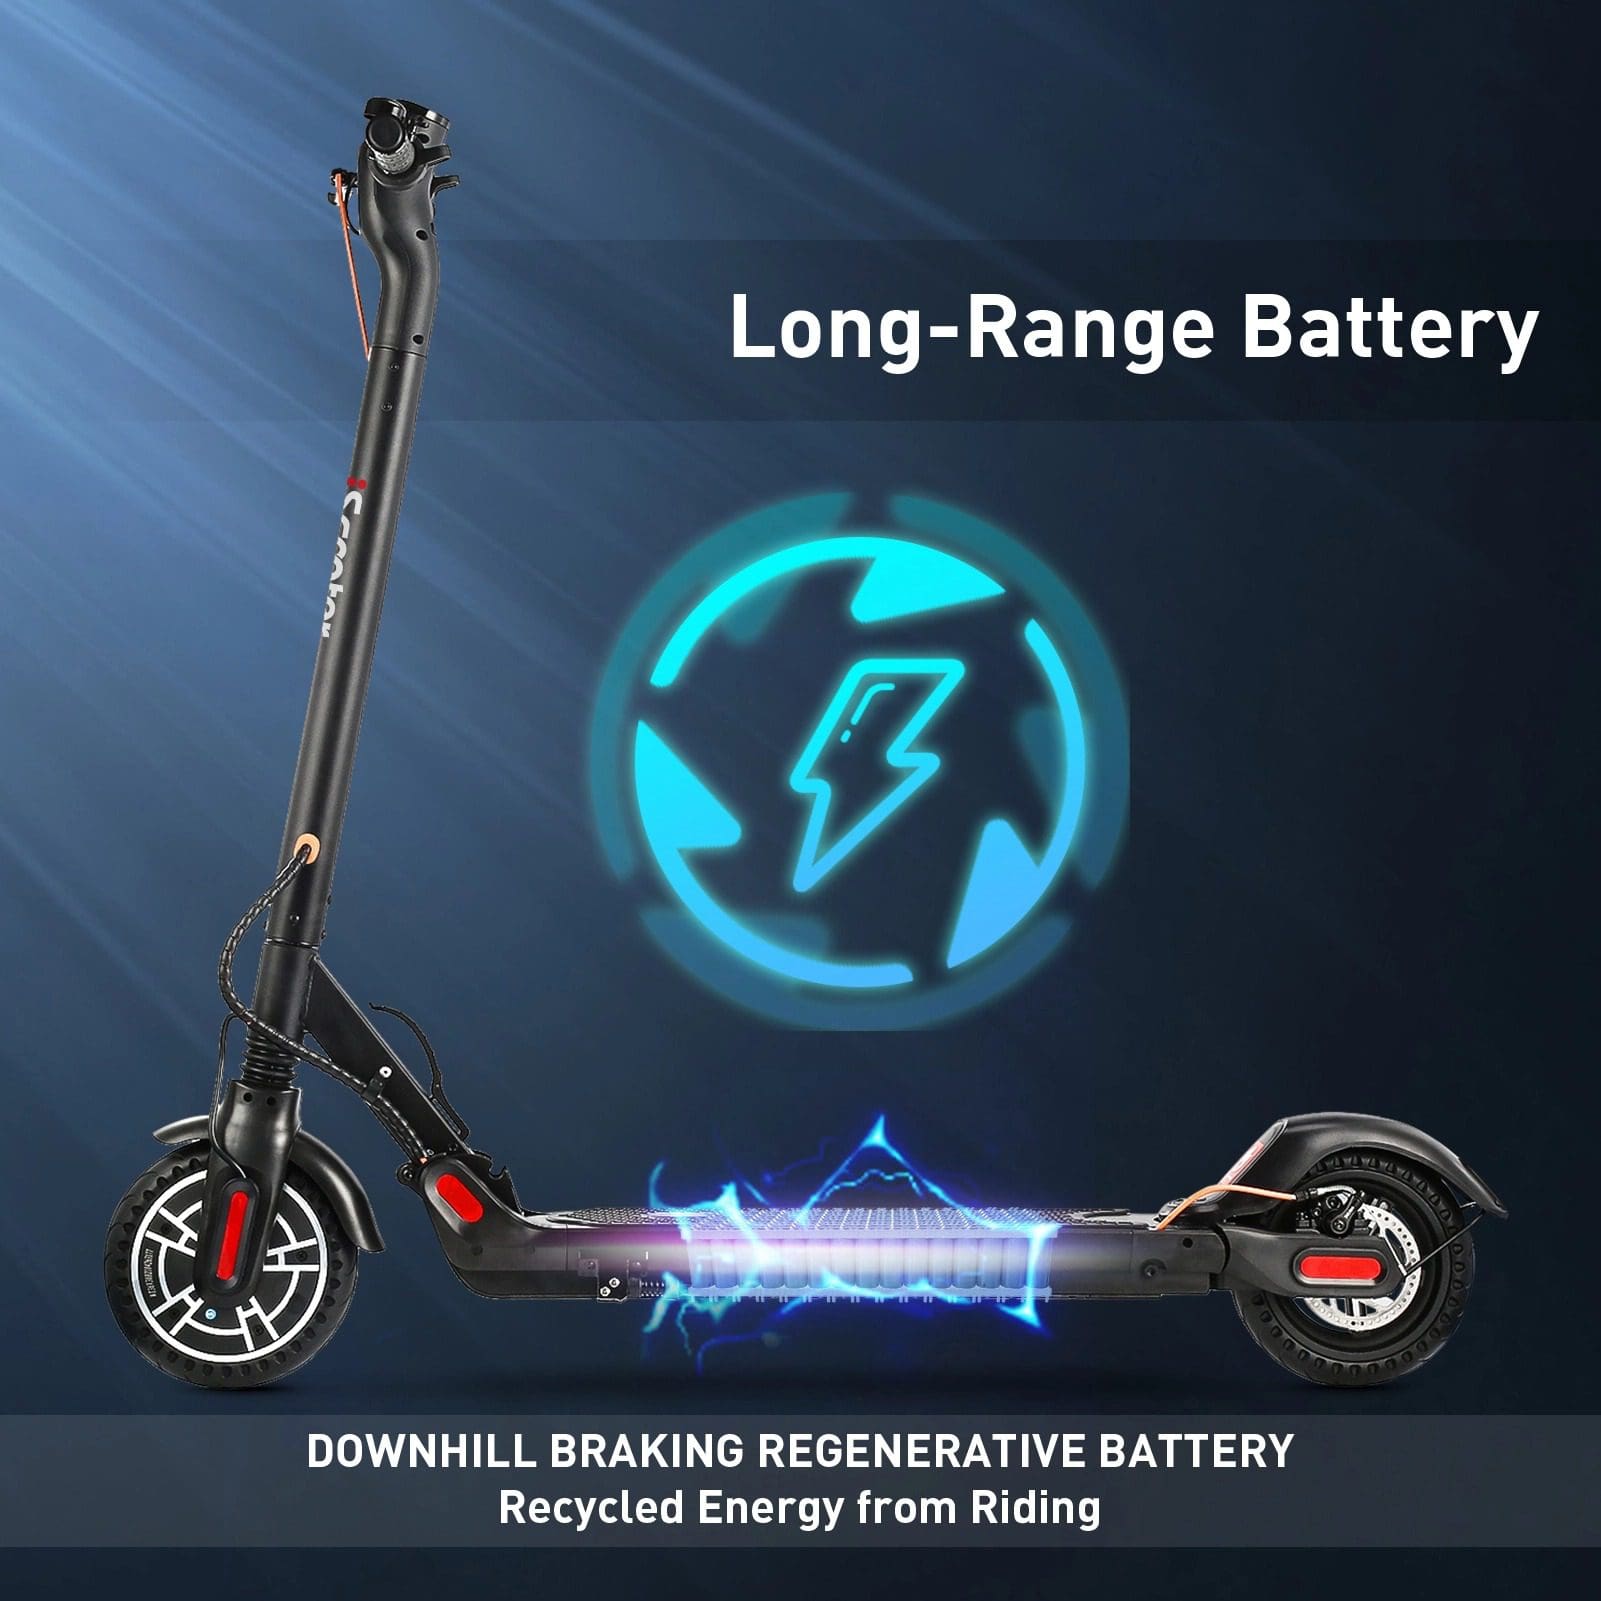 iScooter® M5pro Electric Scooter, With Front and Rear Shock Absorber